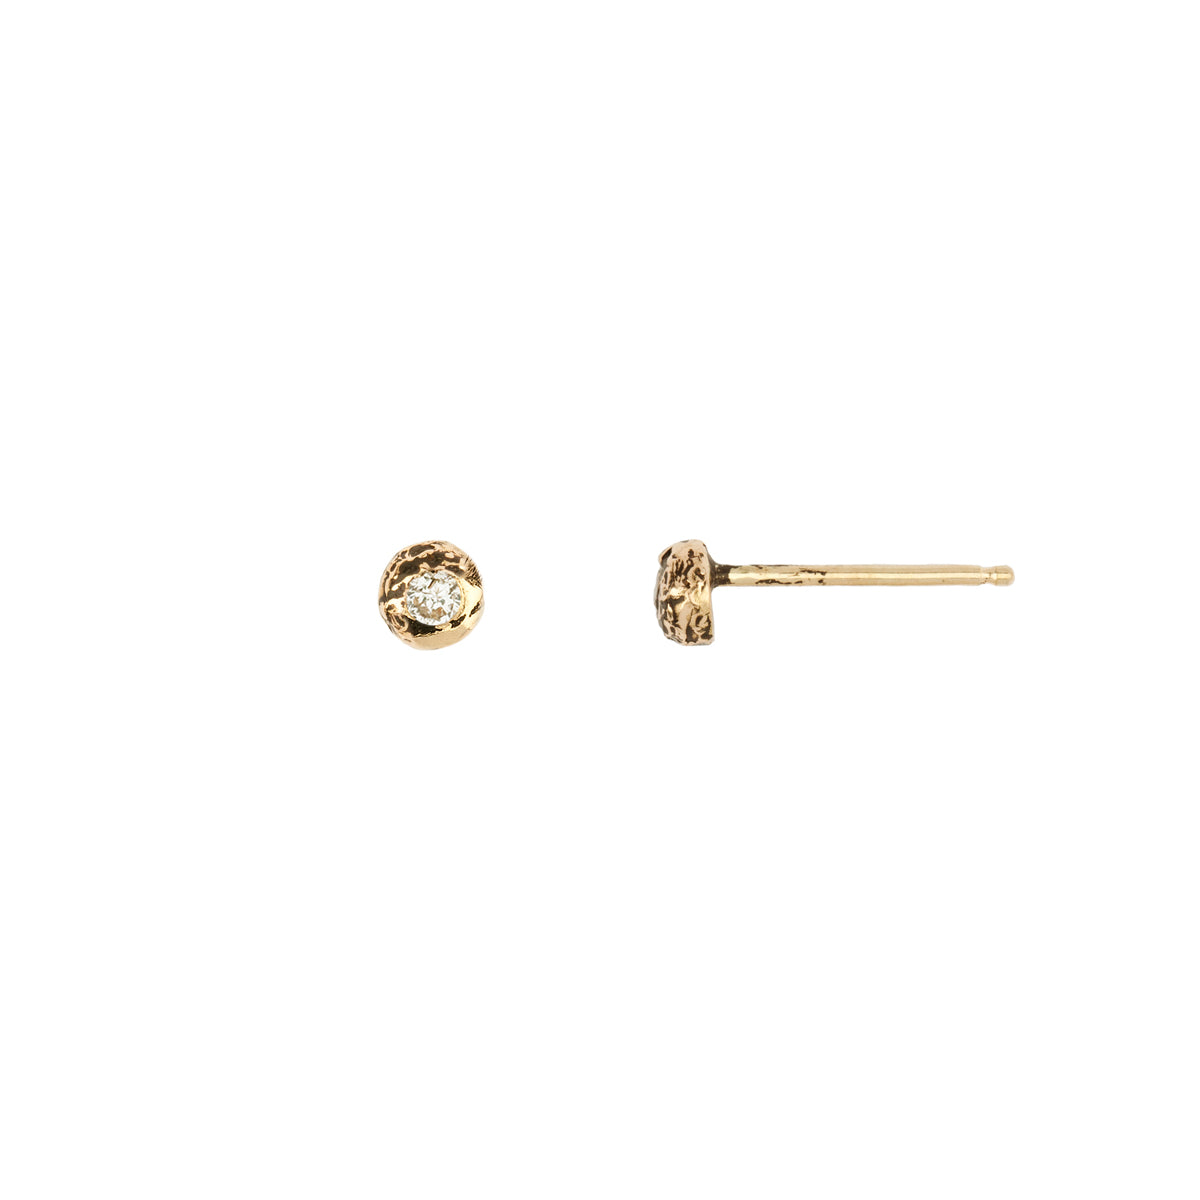 A set of 14k gold stud earrings set with a white diamond.